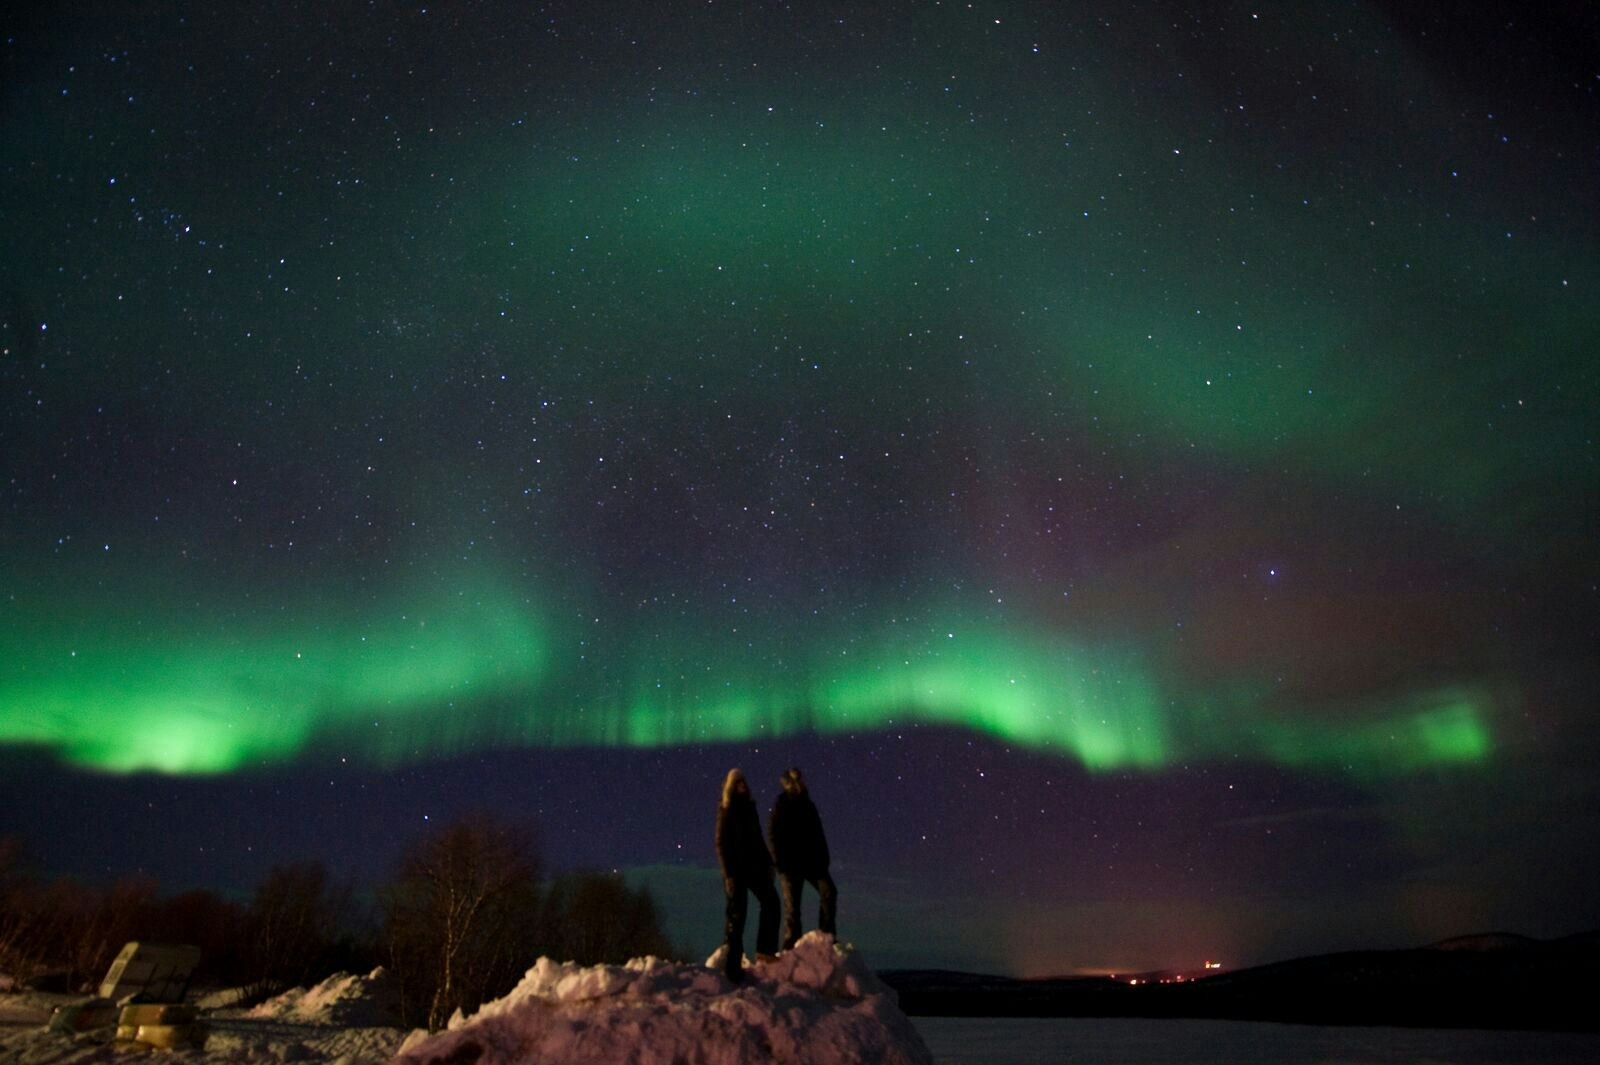 Two people watching the green streaks of the Northern lights across a dark sky